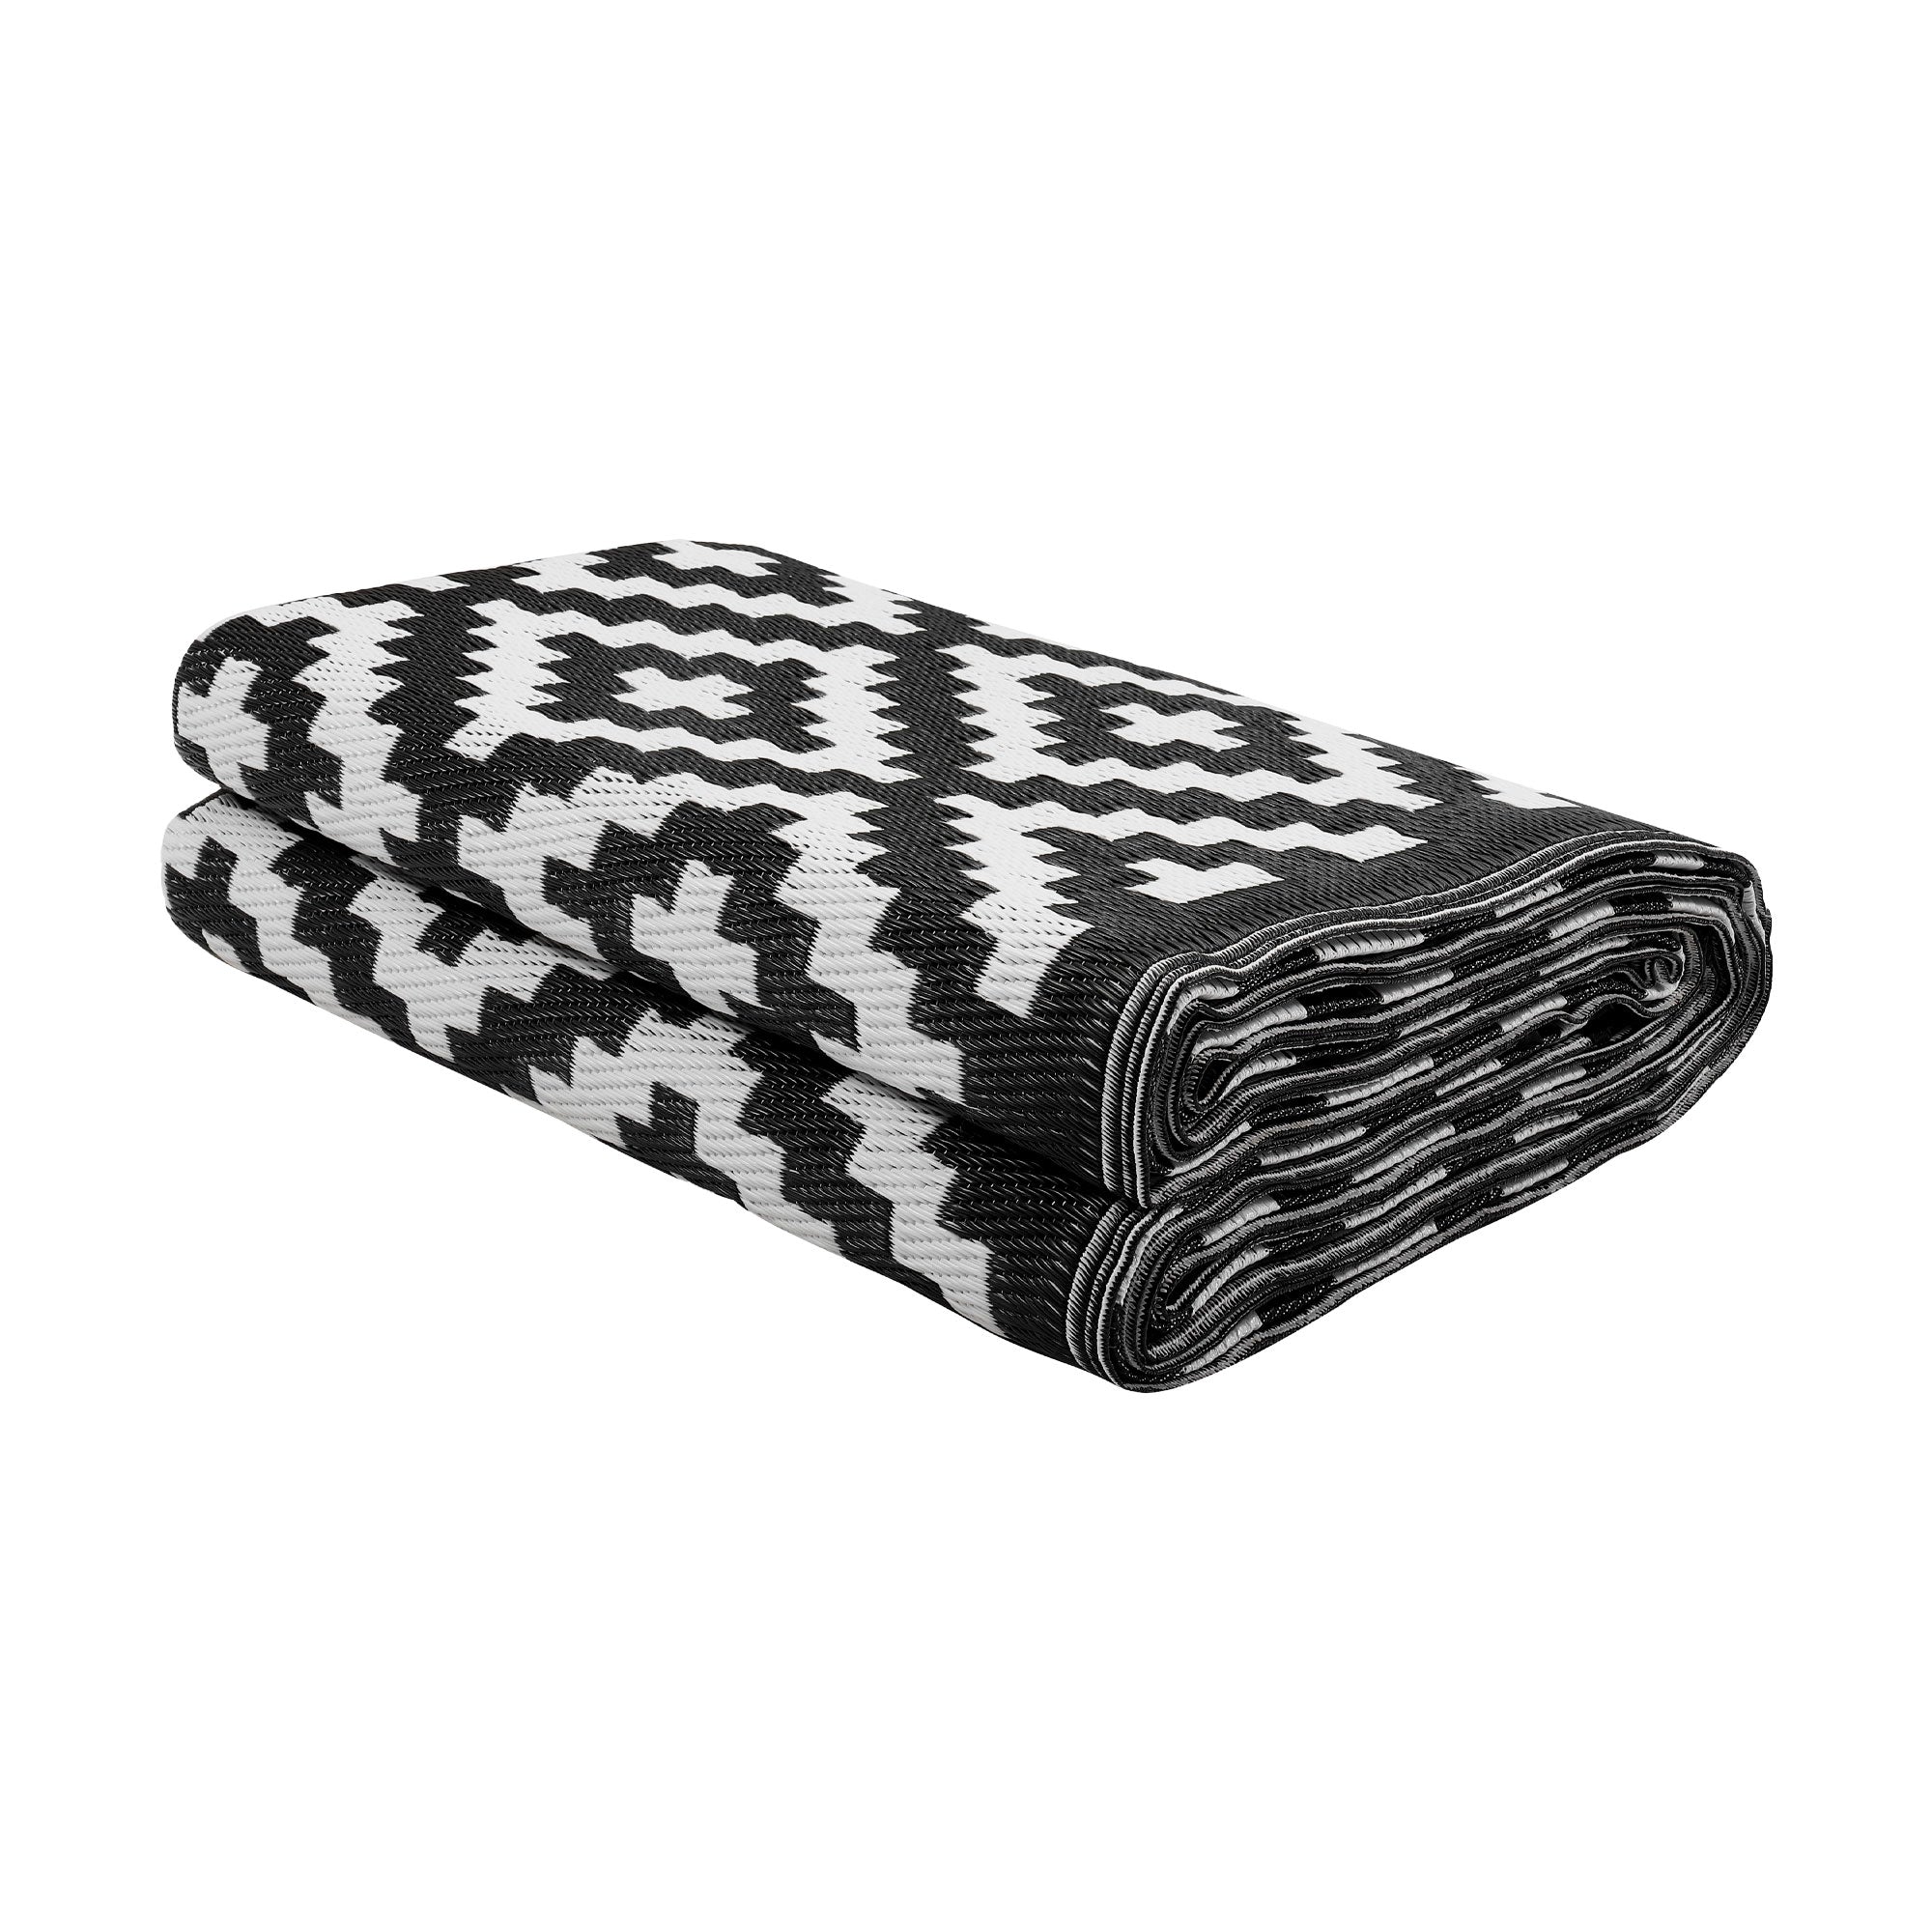 Outdoor Recycled Plastic Rug for Camping (Black / White)